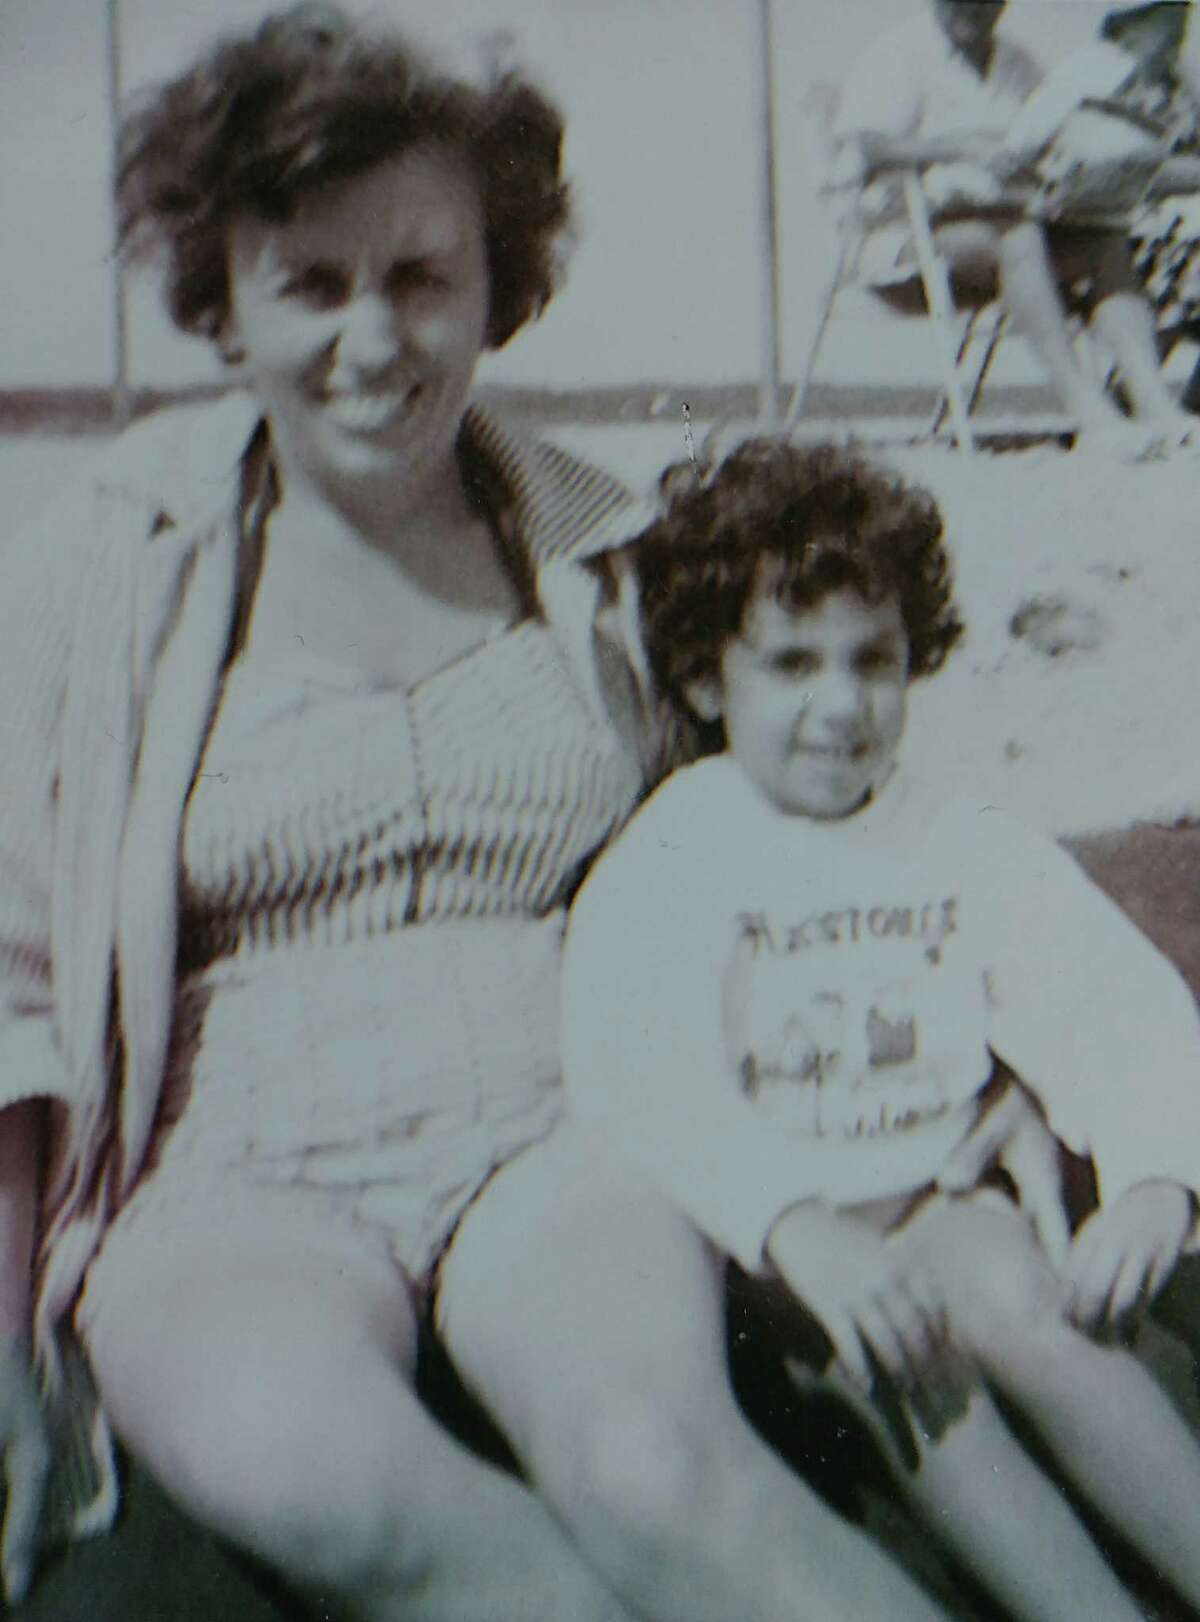 Carol Geary, right, as a child with her mother, Anne Nozzolillo. Geary, whose mother died when she was 25, organized a discussion on Saturday of the book "Motherless Daughters," about women whose mothers died early. (Provided photo.)